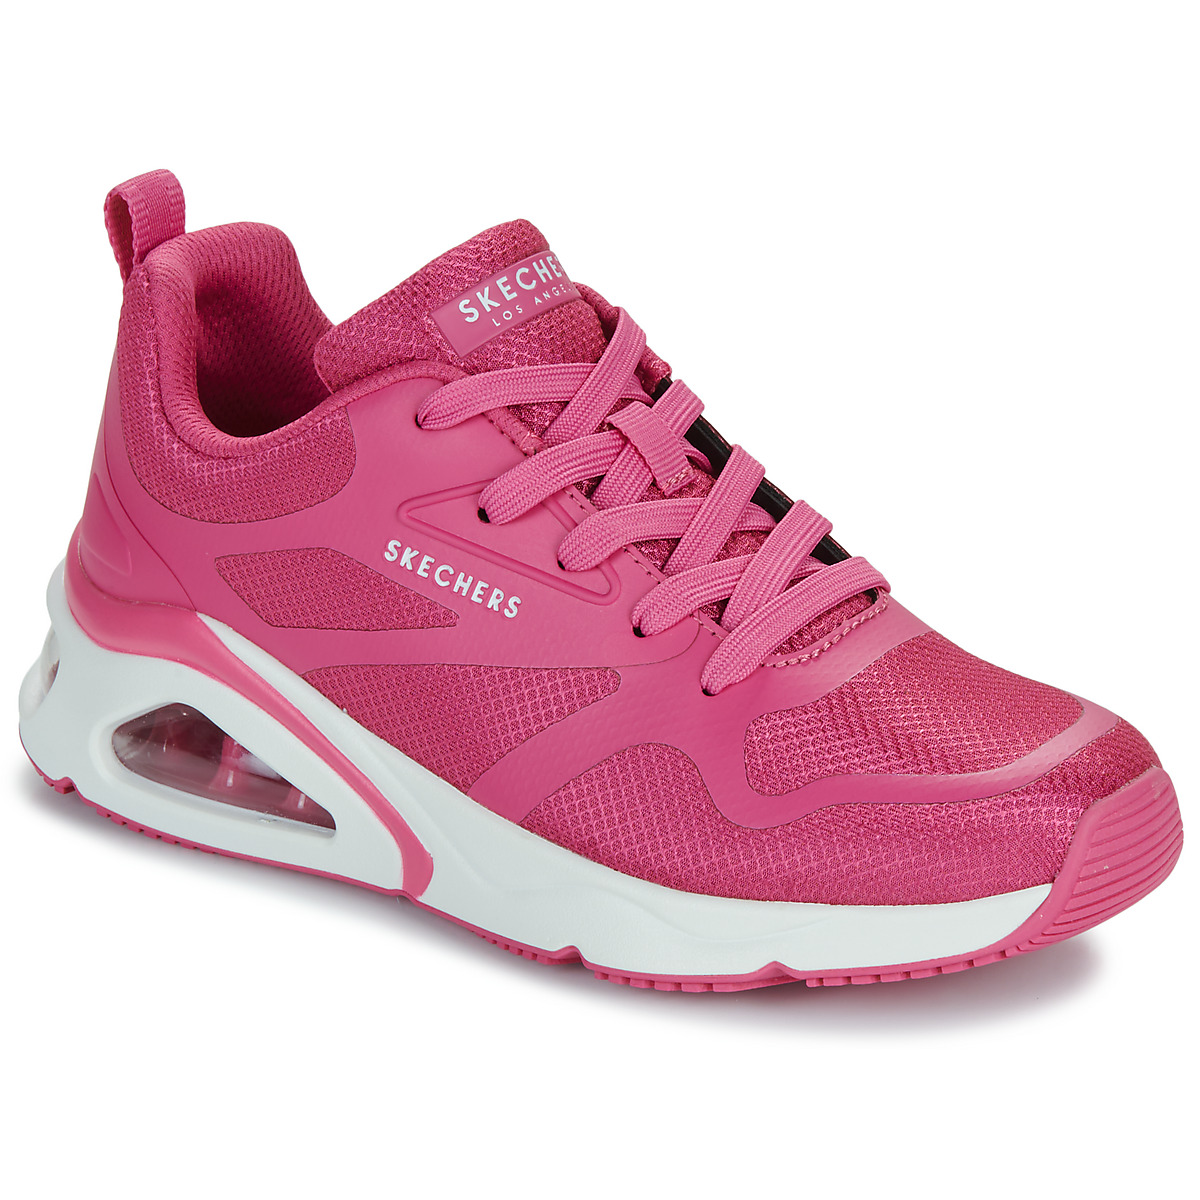 Chaussures Femme Baskets basses Skechers TRES-AIR UNO - REVOLUTION-AIRY 